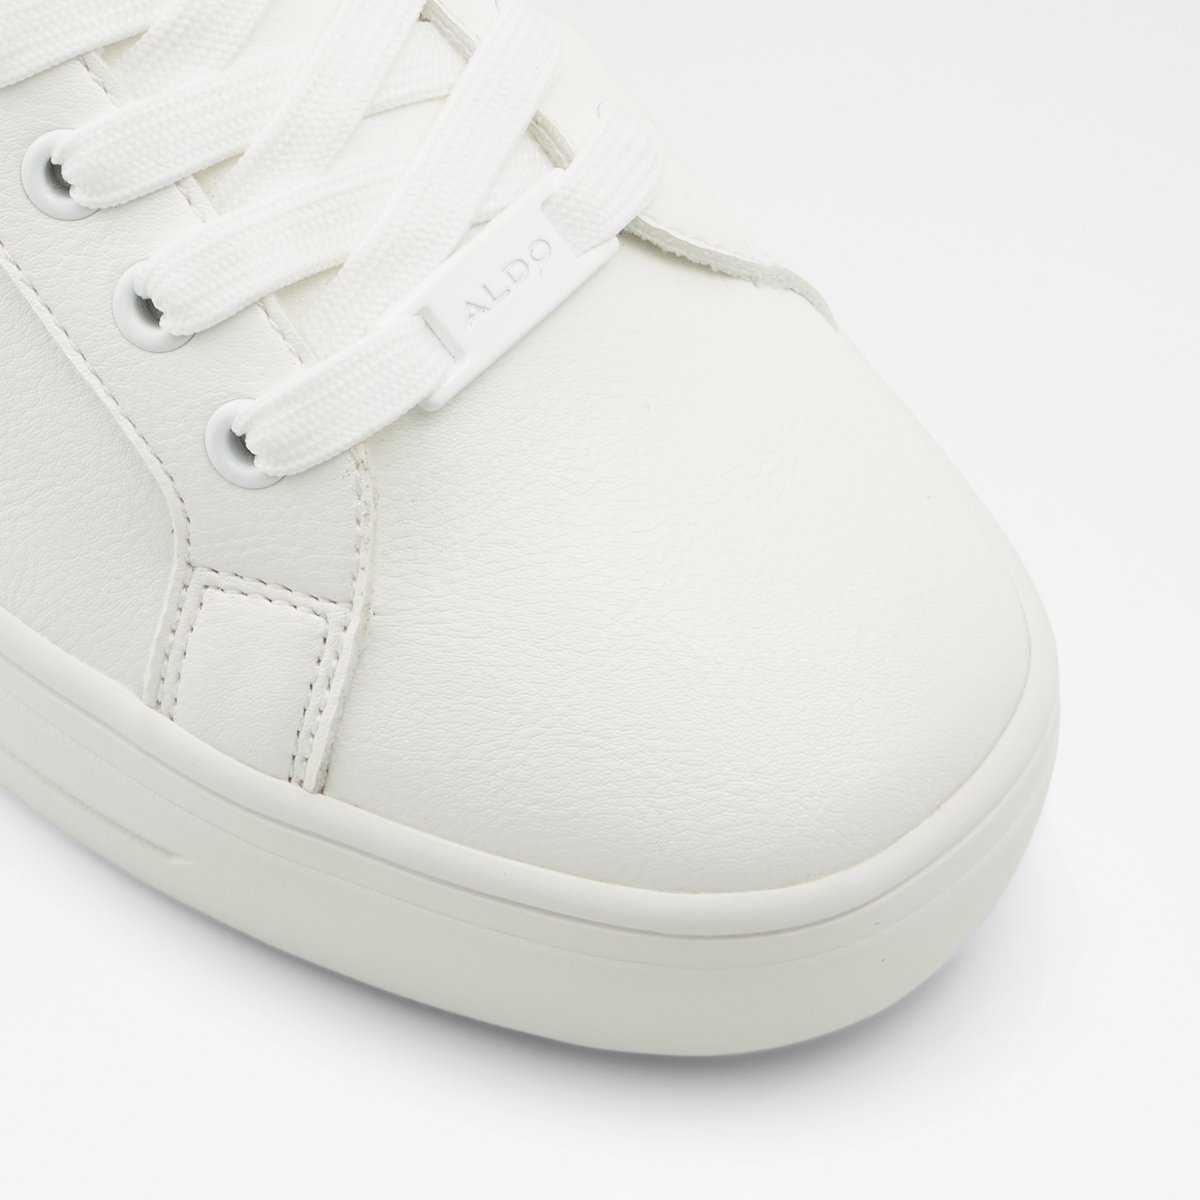 Meadow White Synthetic Smooth Women's Low top sneakers | ALDO Canada